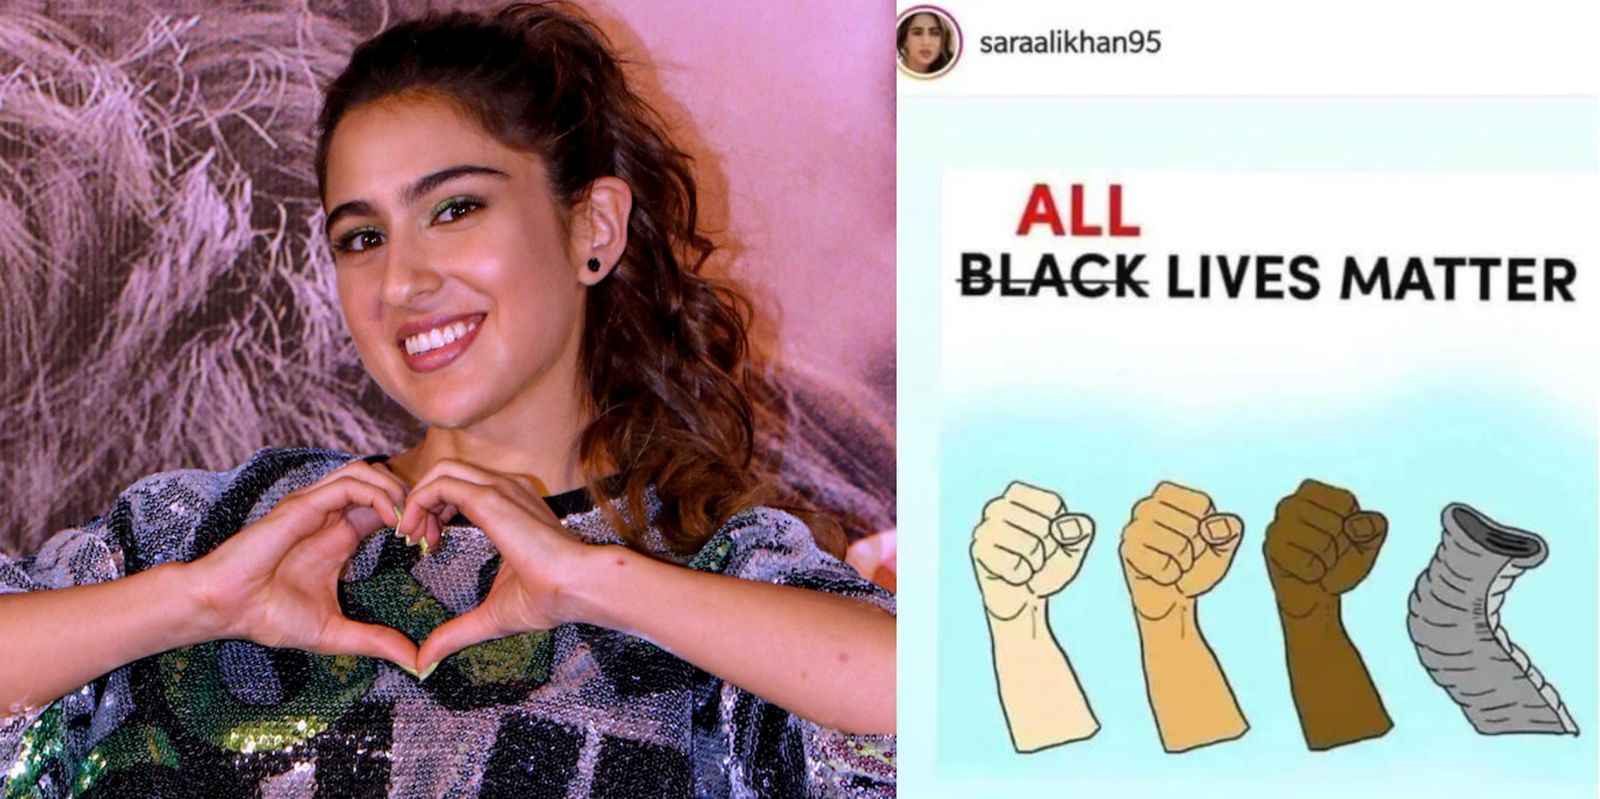 Sara Ali Khan Posts On ‘All Lives Matter’ Before Deleting It; Twitter Questions Her Columbia University Degree